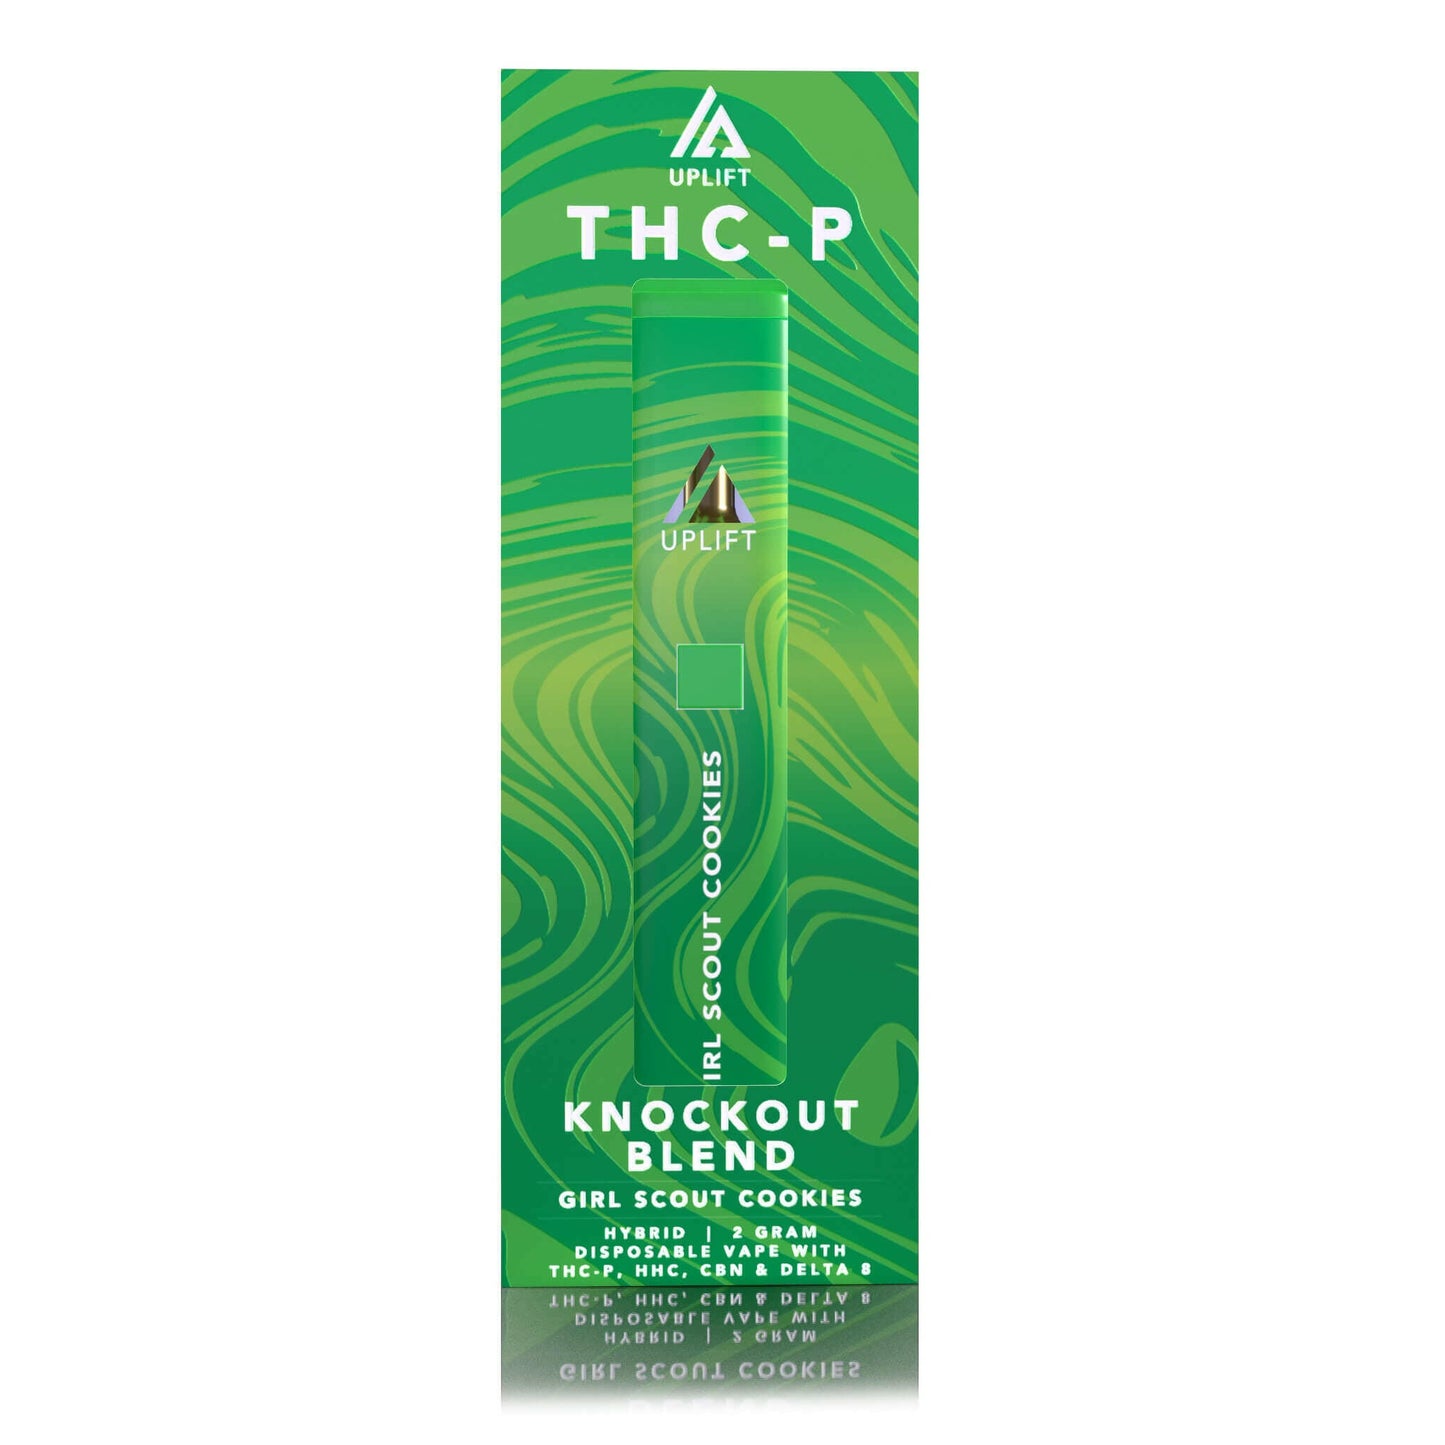 UPLIFT-THC-P-Knockout-Blend-Disposable-Vape-Device-2G-girl-scout-cookies-hybrid